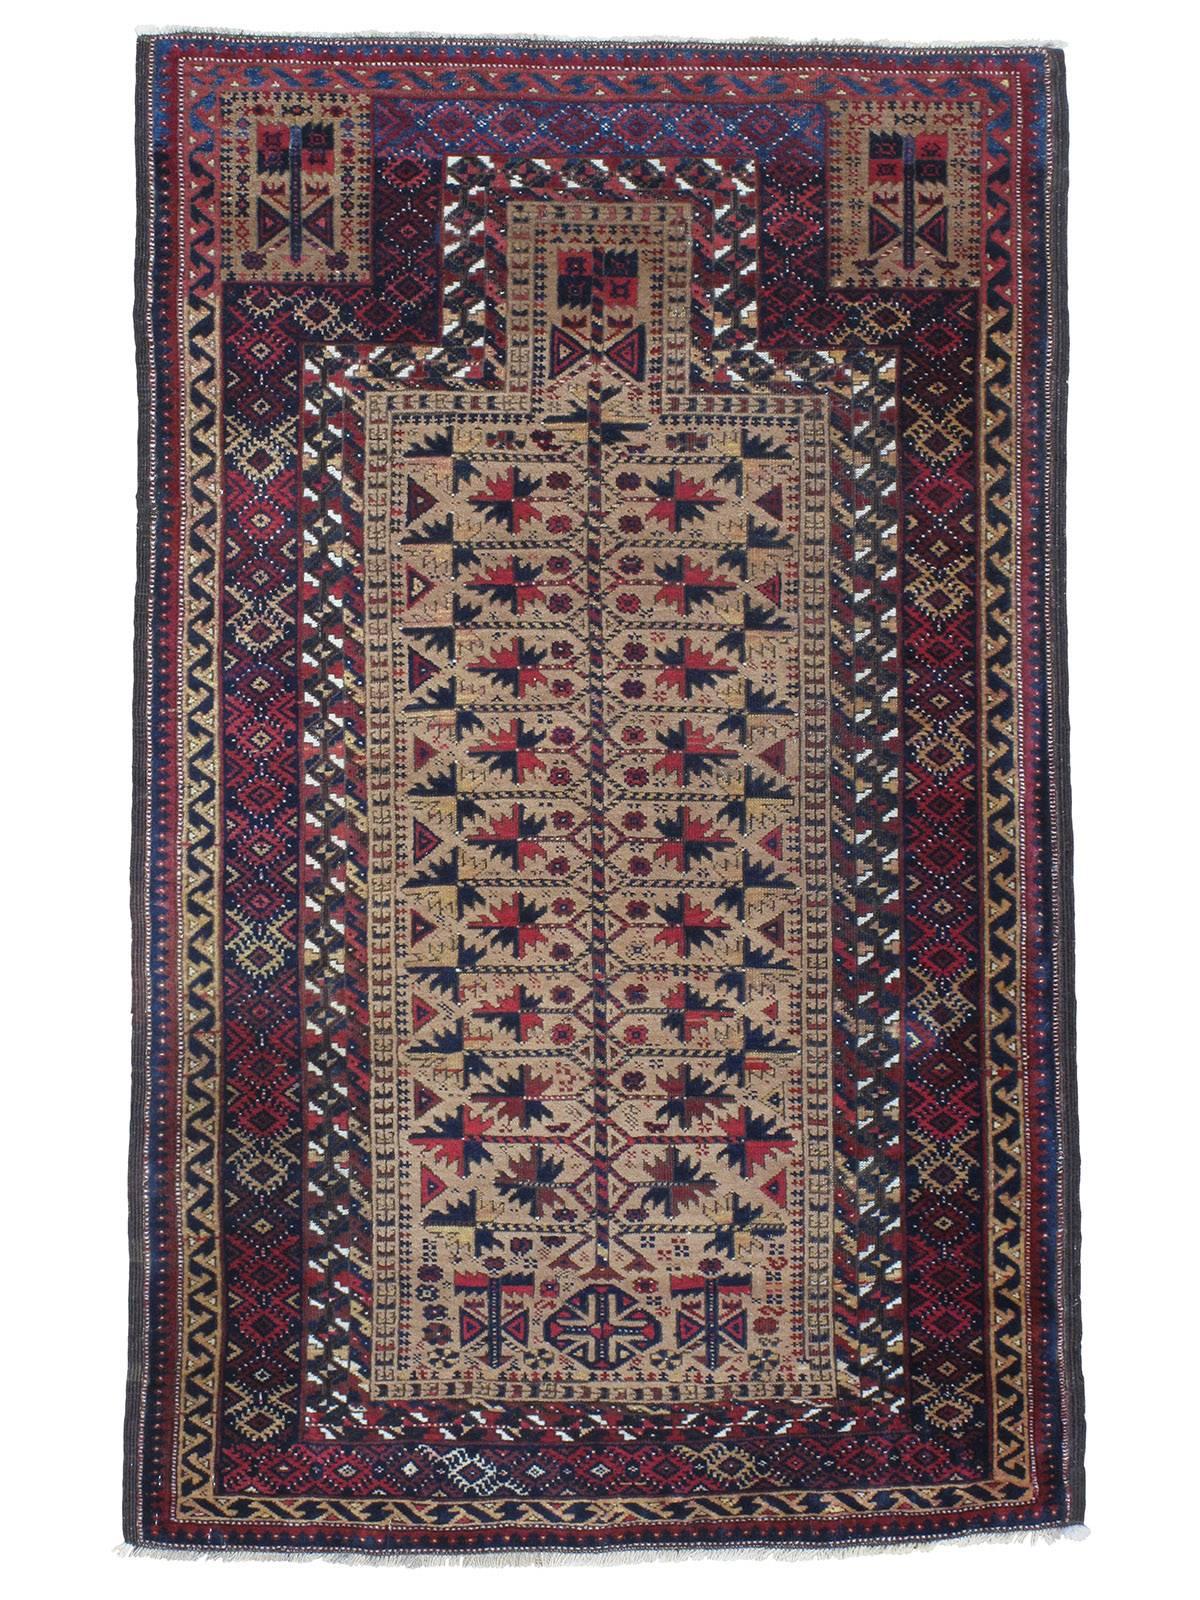 Antique Baluch "Tree-of-Life" Rug 'DK-103-107' For Sale